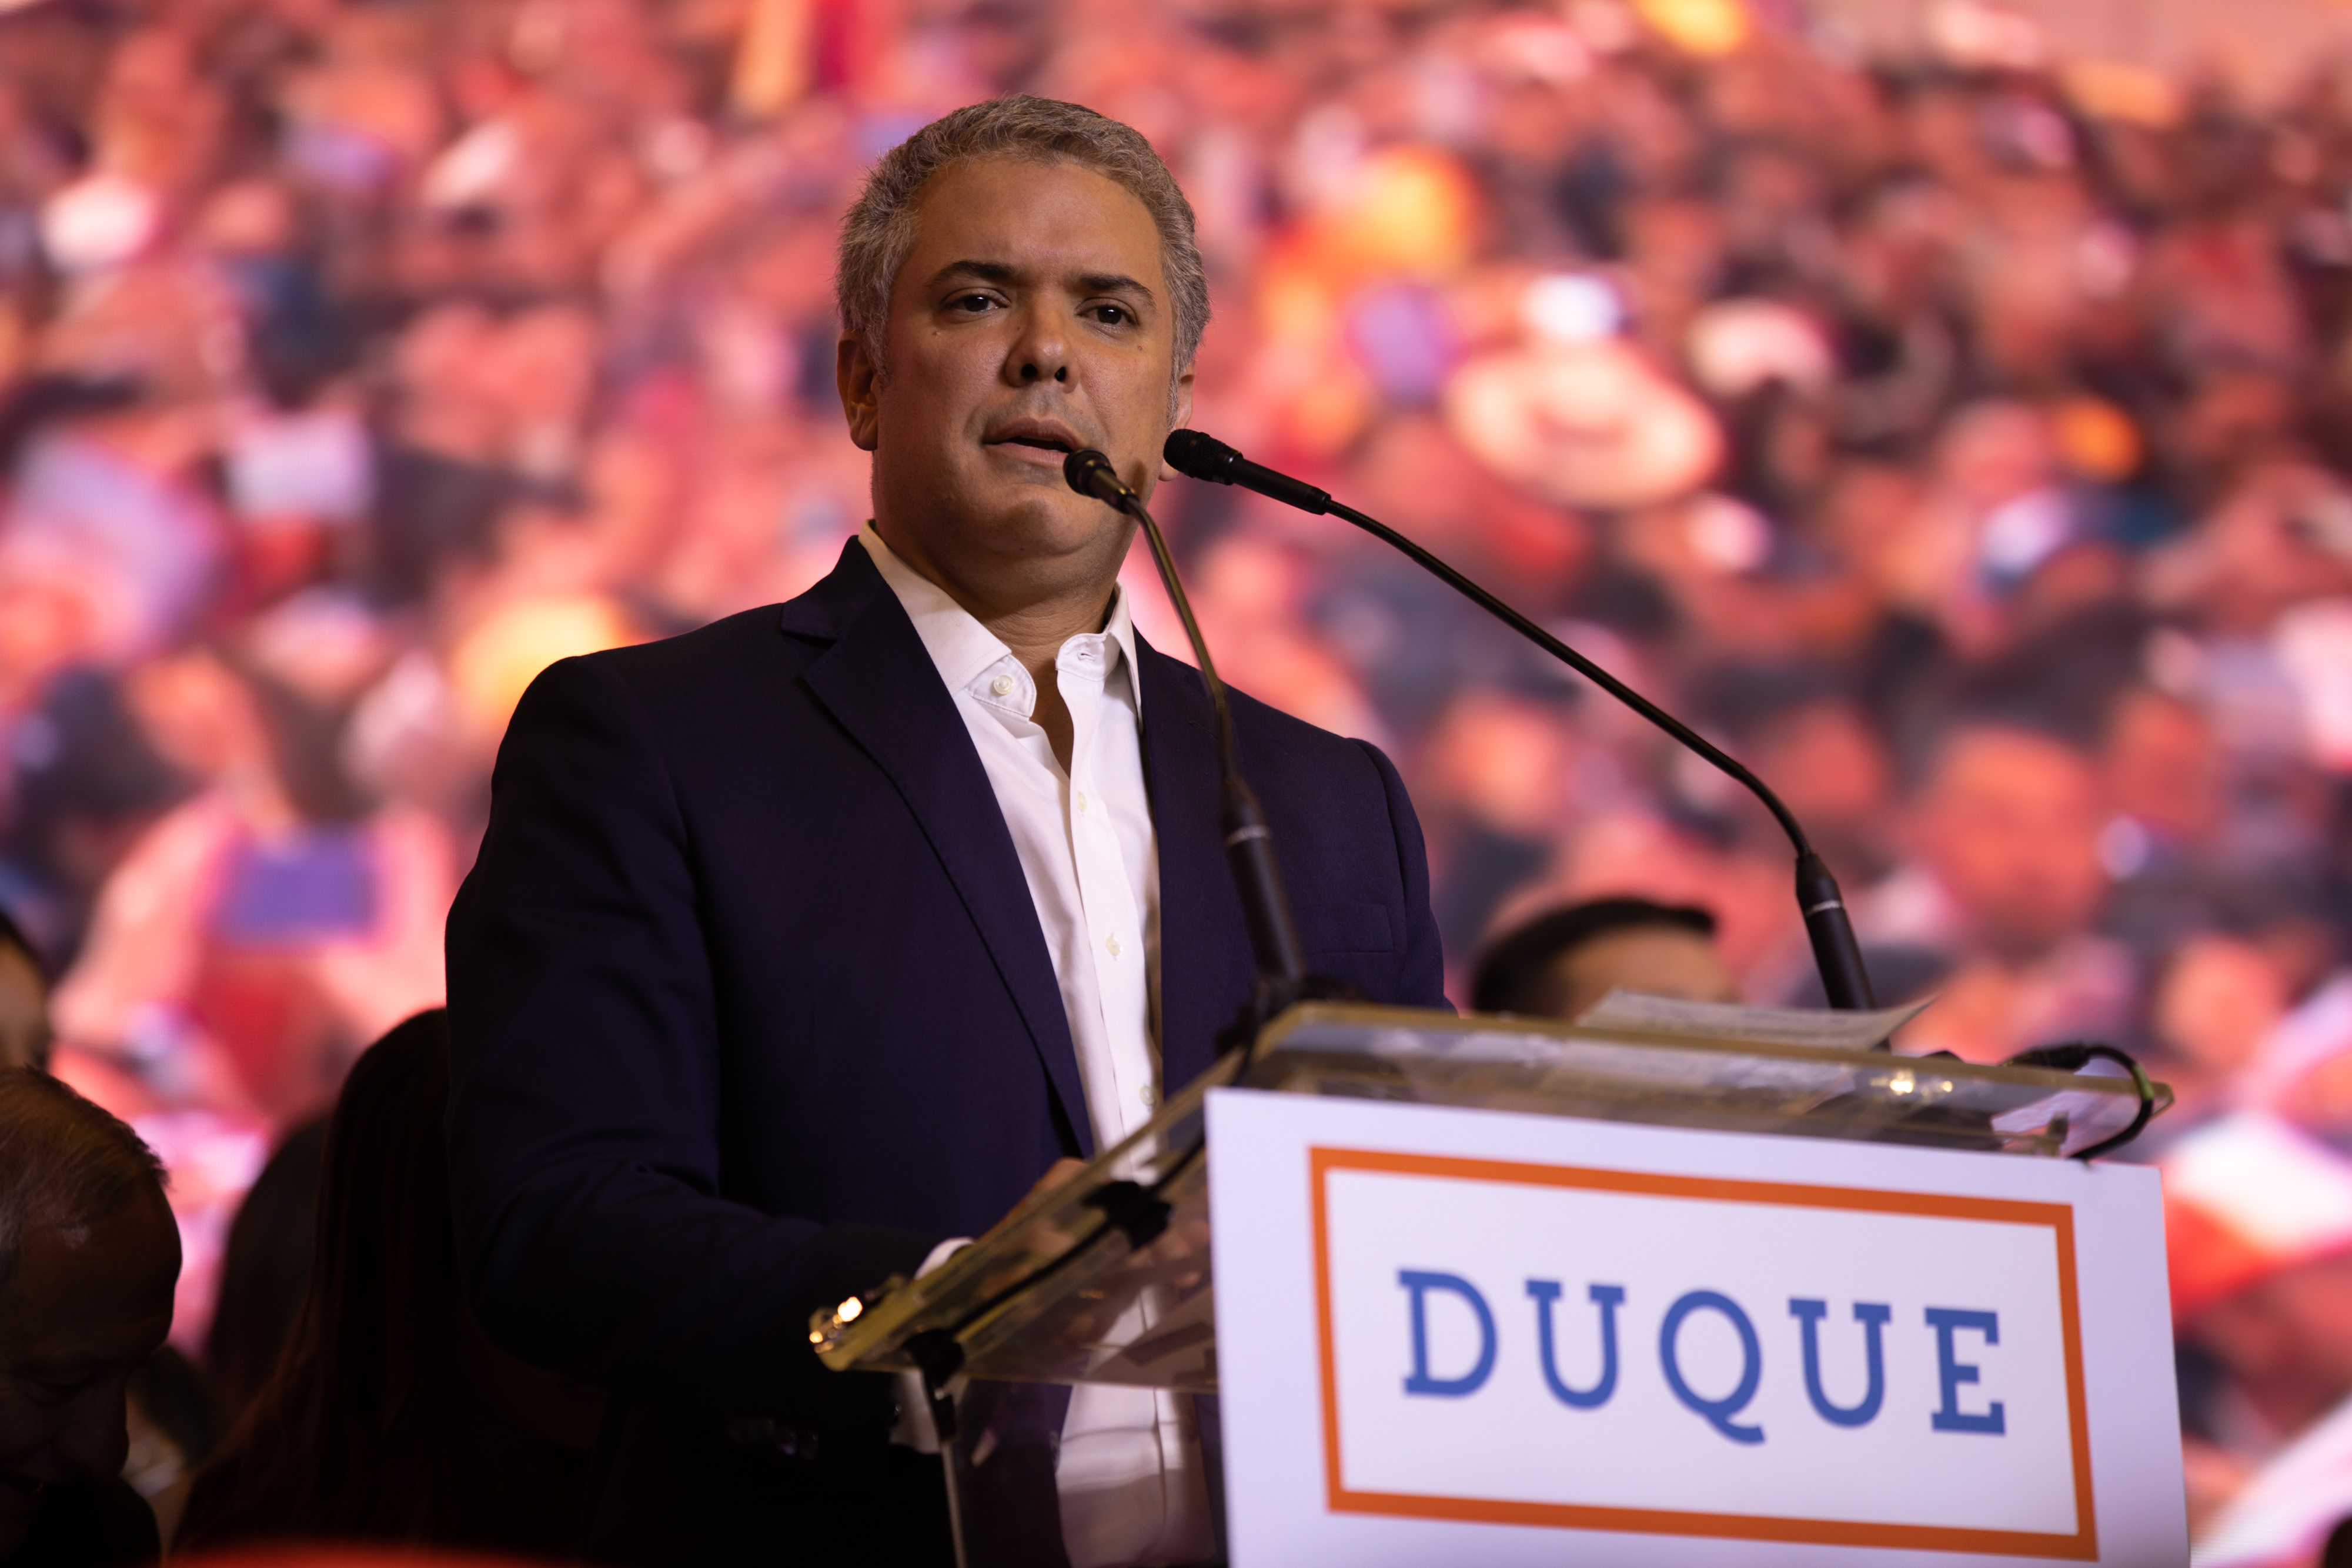 Ivan Duque, Colombia's president-elect, speaks during an election event at the party's headquarters in Bogota, Colombia, on Sunday, June 17, 2018. (Tomas Ayuso—Bloomberg via Getty Images)